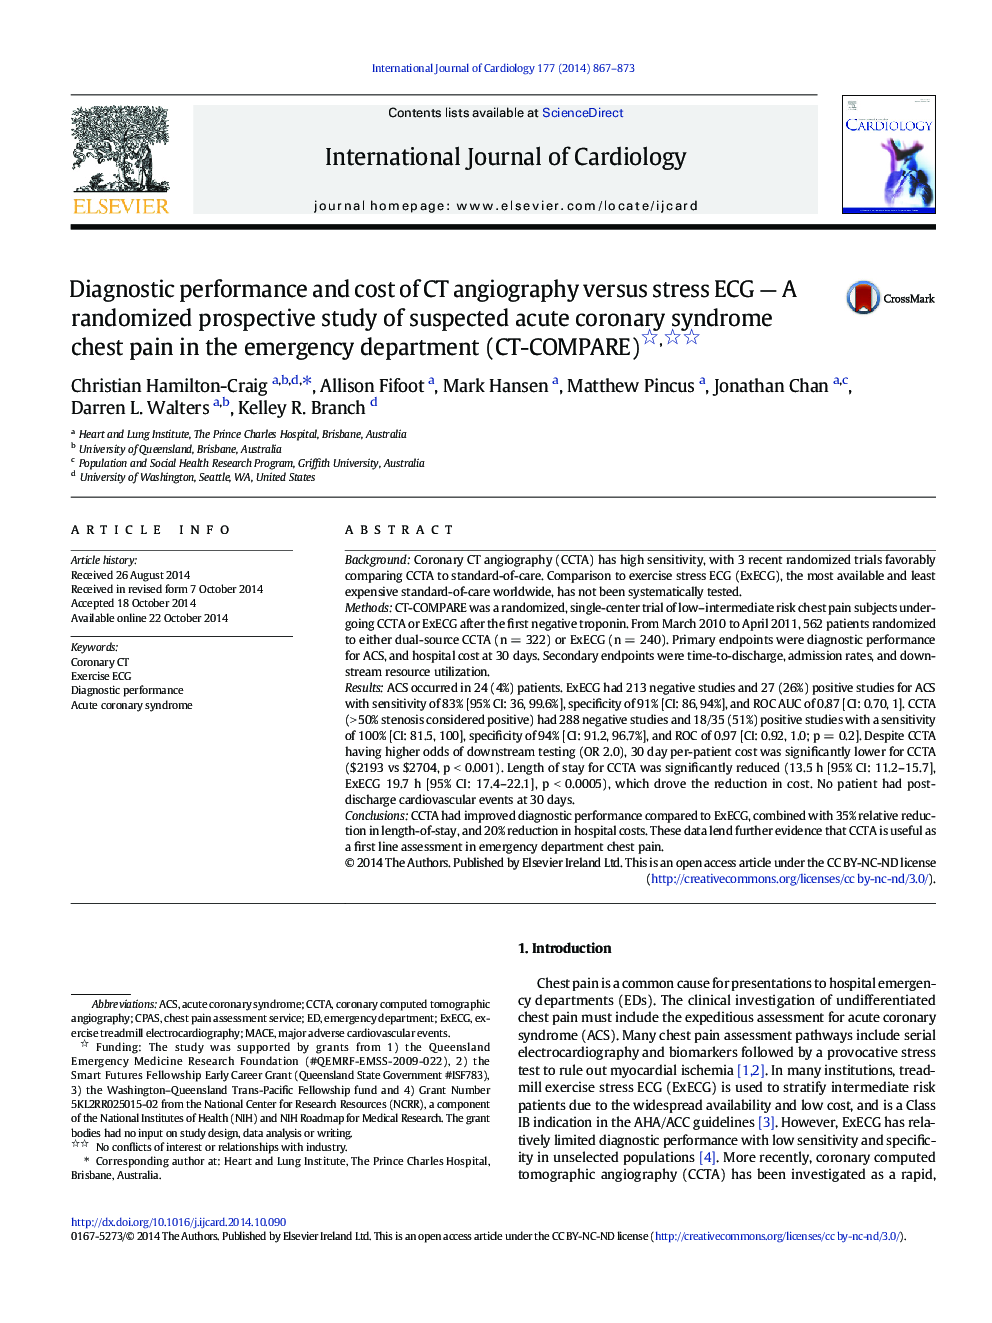 Diagnostic performance and cost of CT angiography versus stress ECG - A randomized prospective study of suspected acute coronary syndrome chest pain in the emergency department (CT-COMPARE)